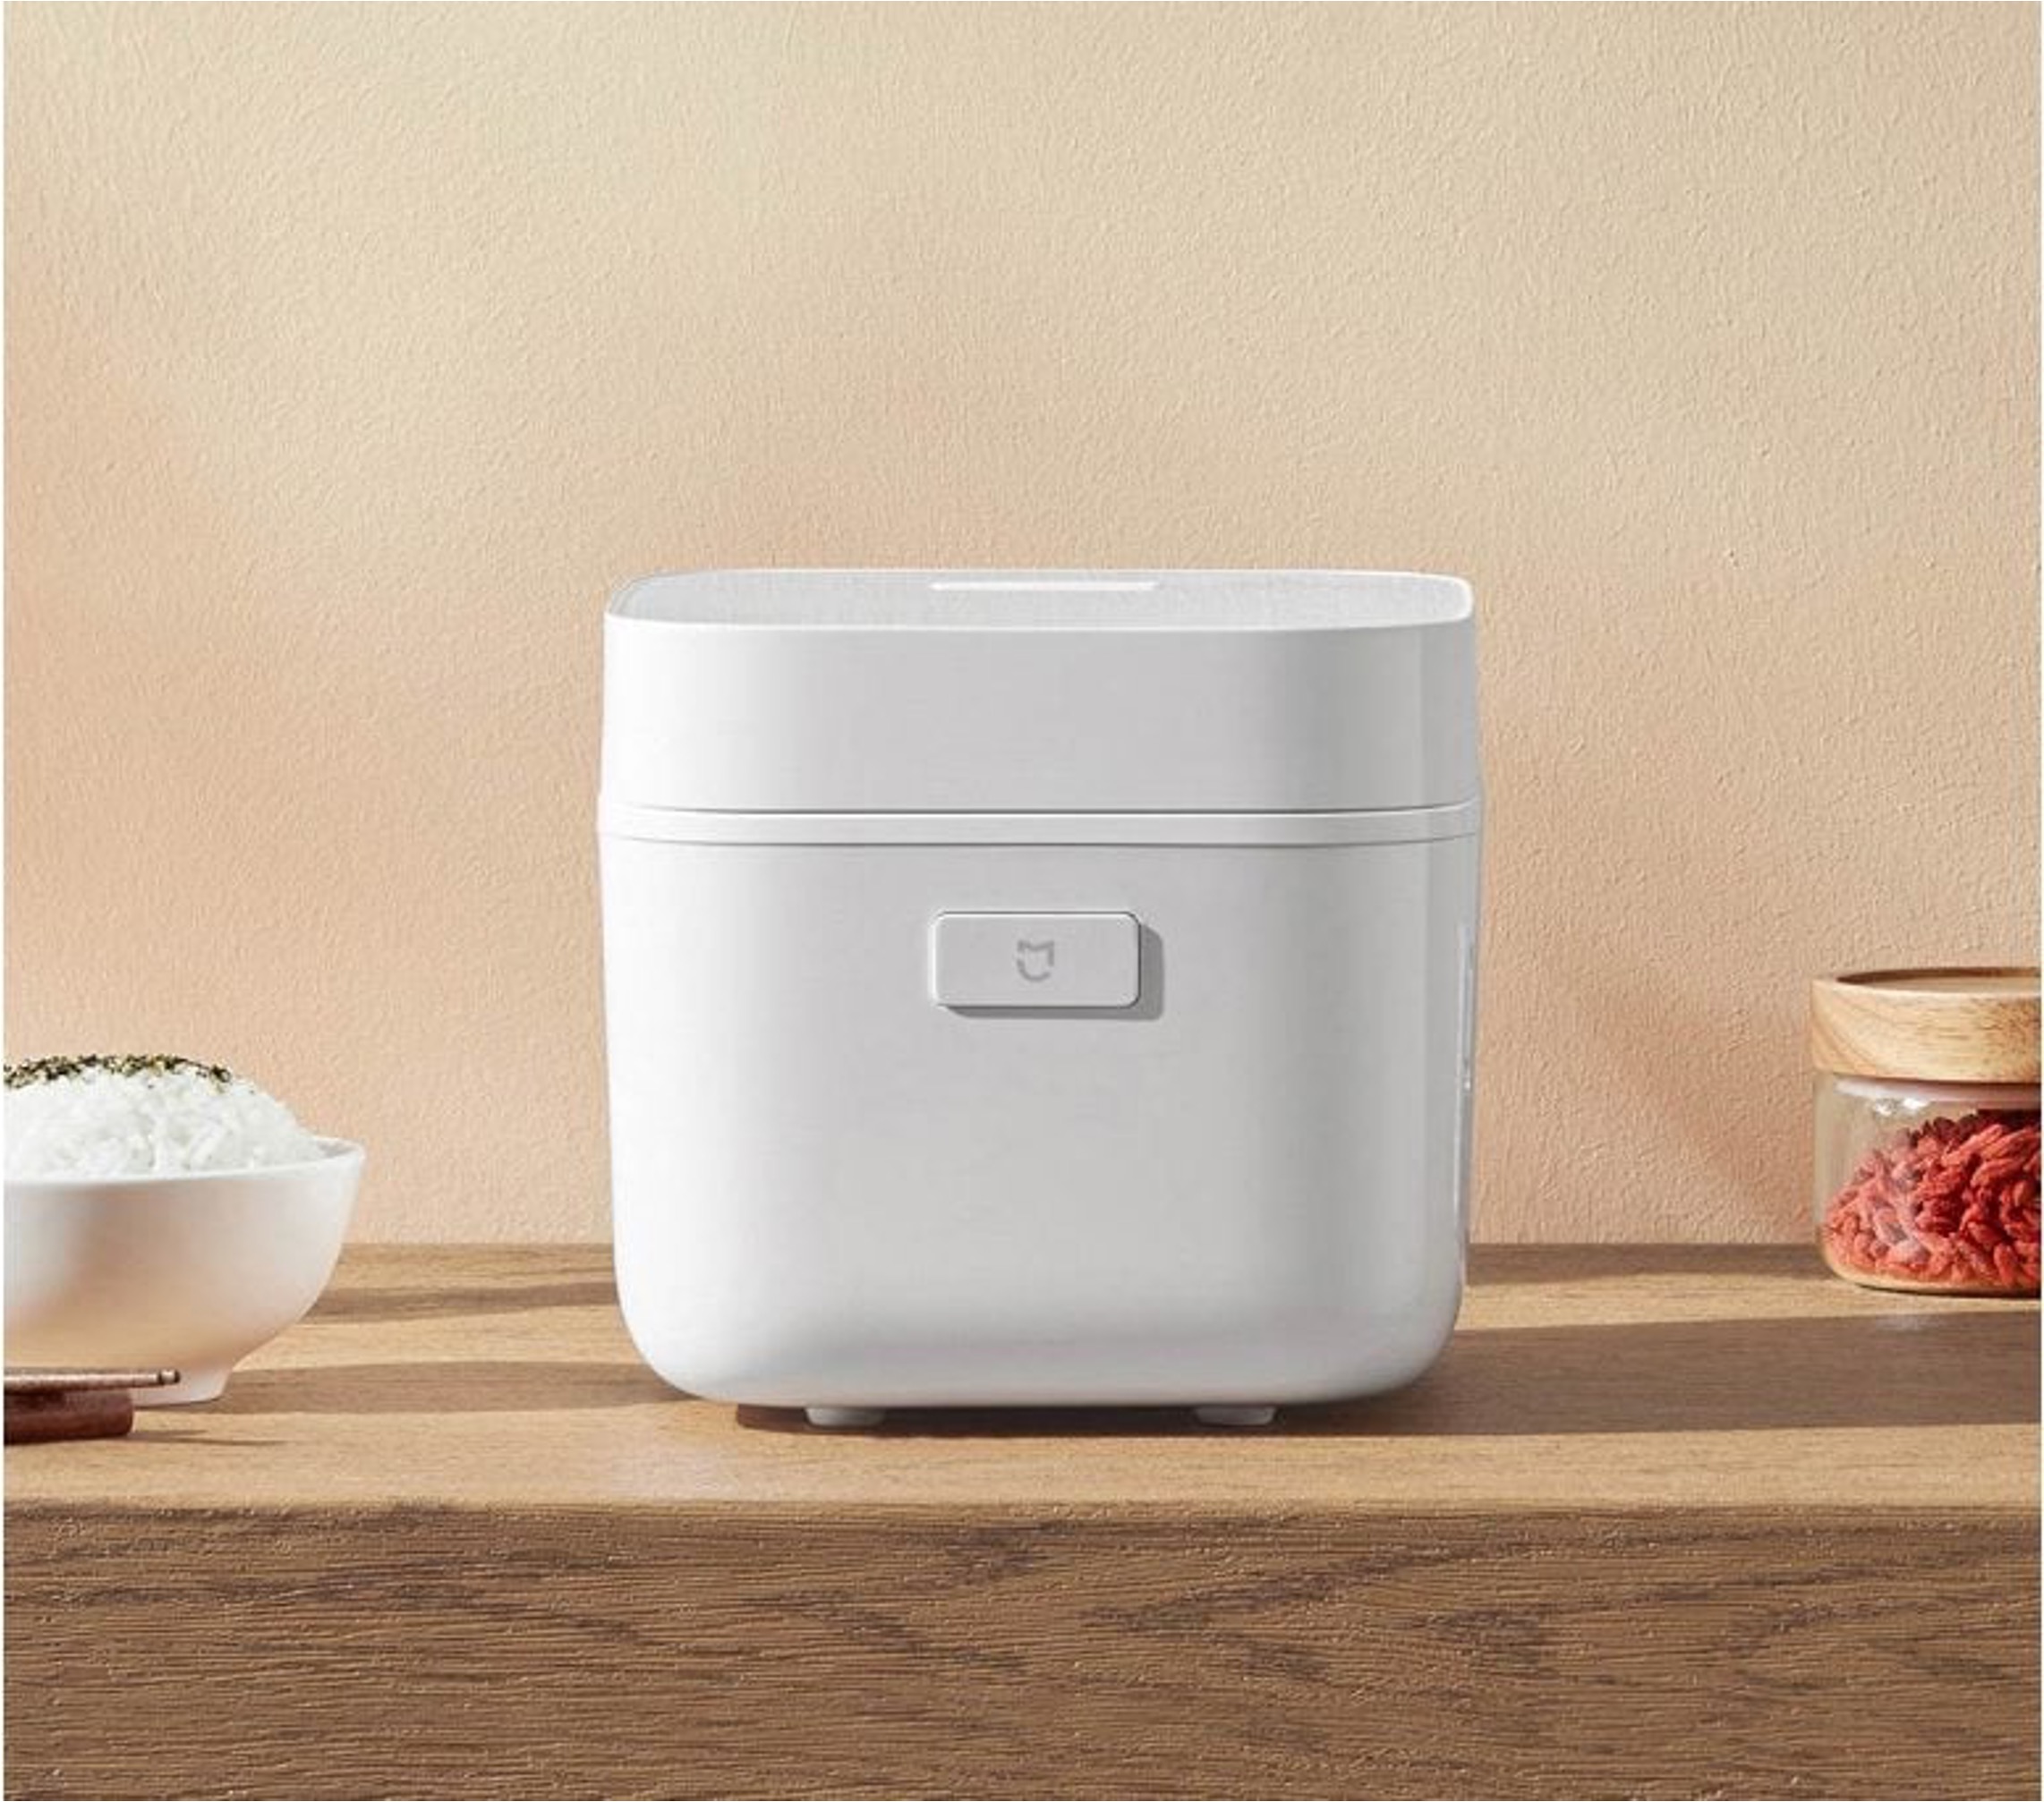 operating-xiaomi-rice-cooker-2